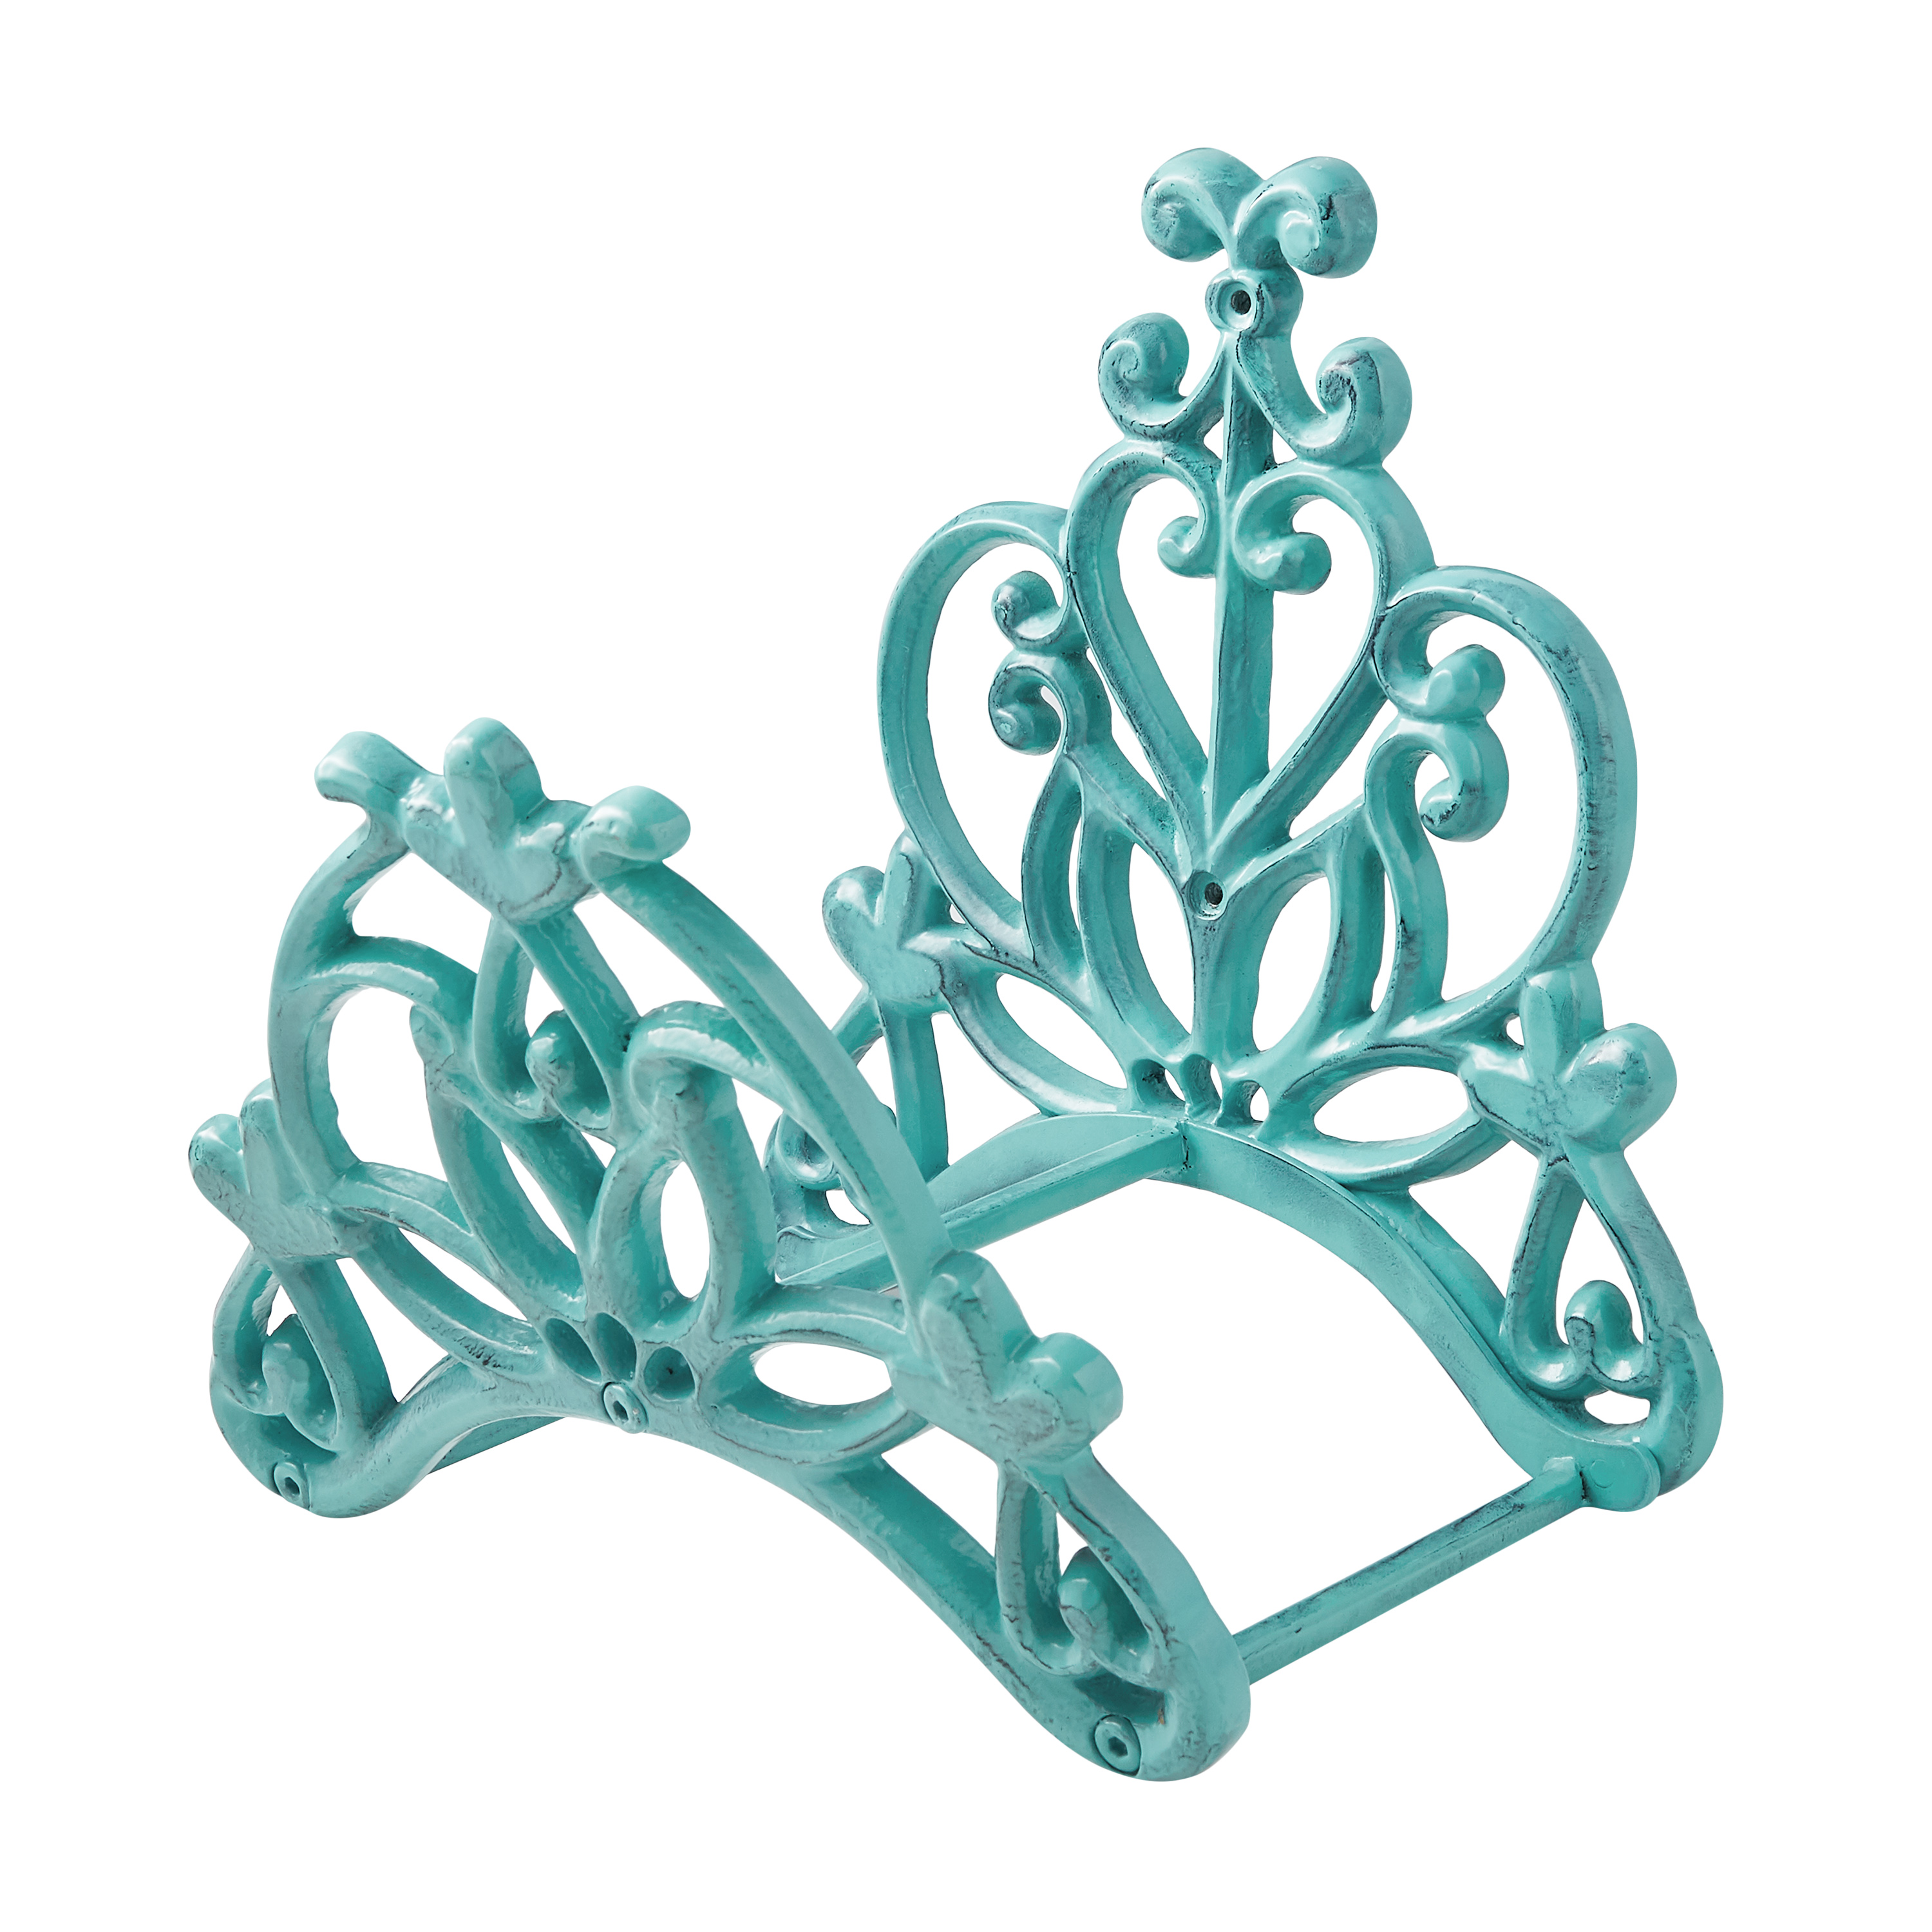 The Pioneer Woman Goldie Decorative Hose Hanger, Teal - image 3 of 7